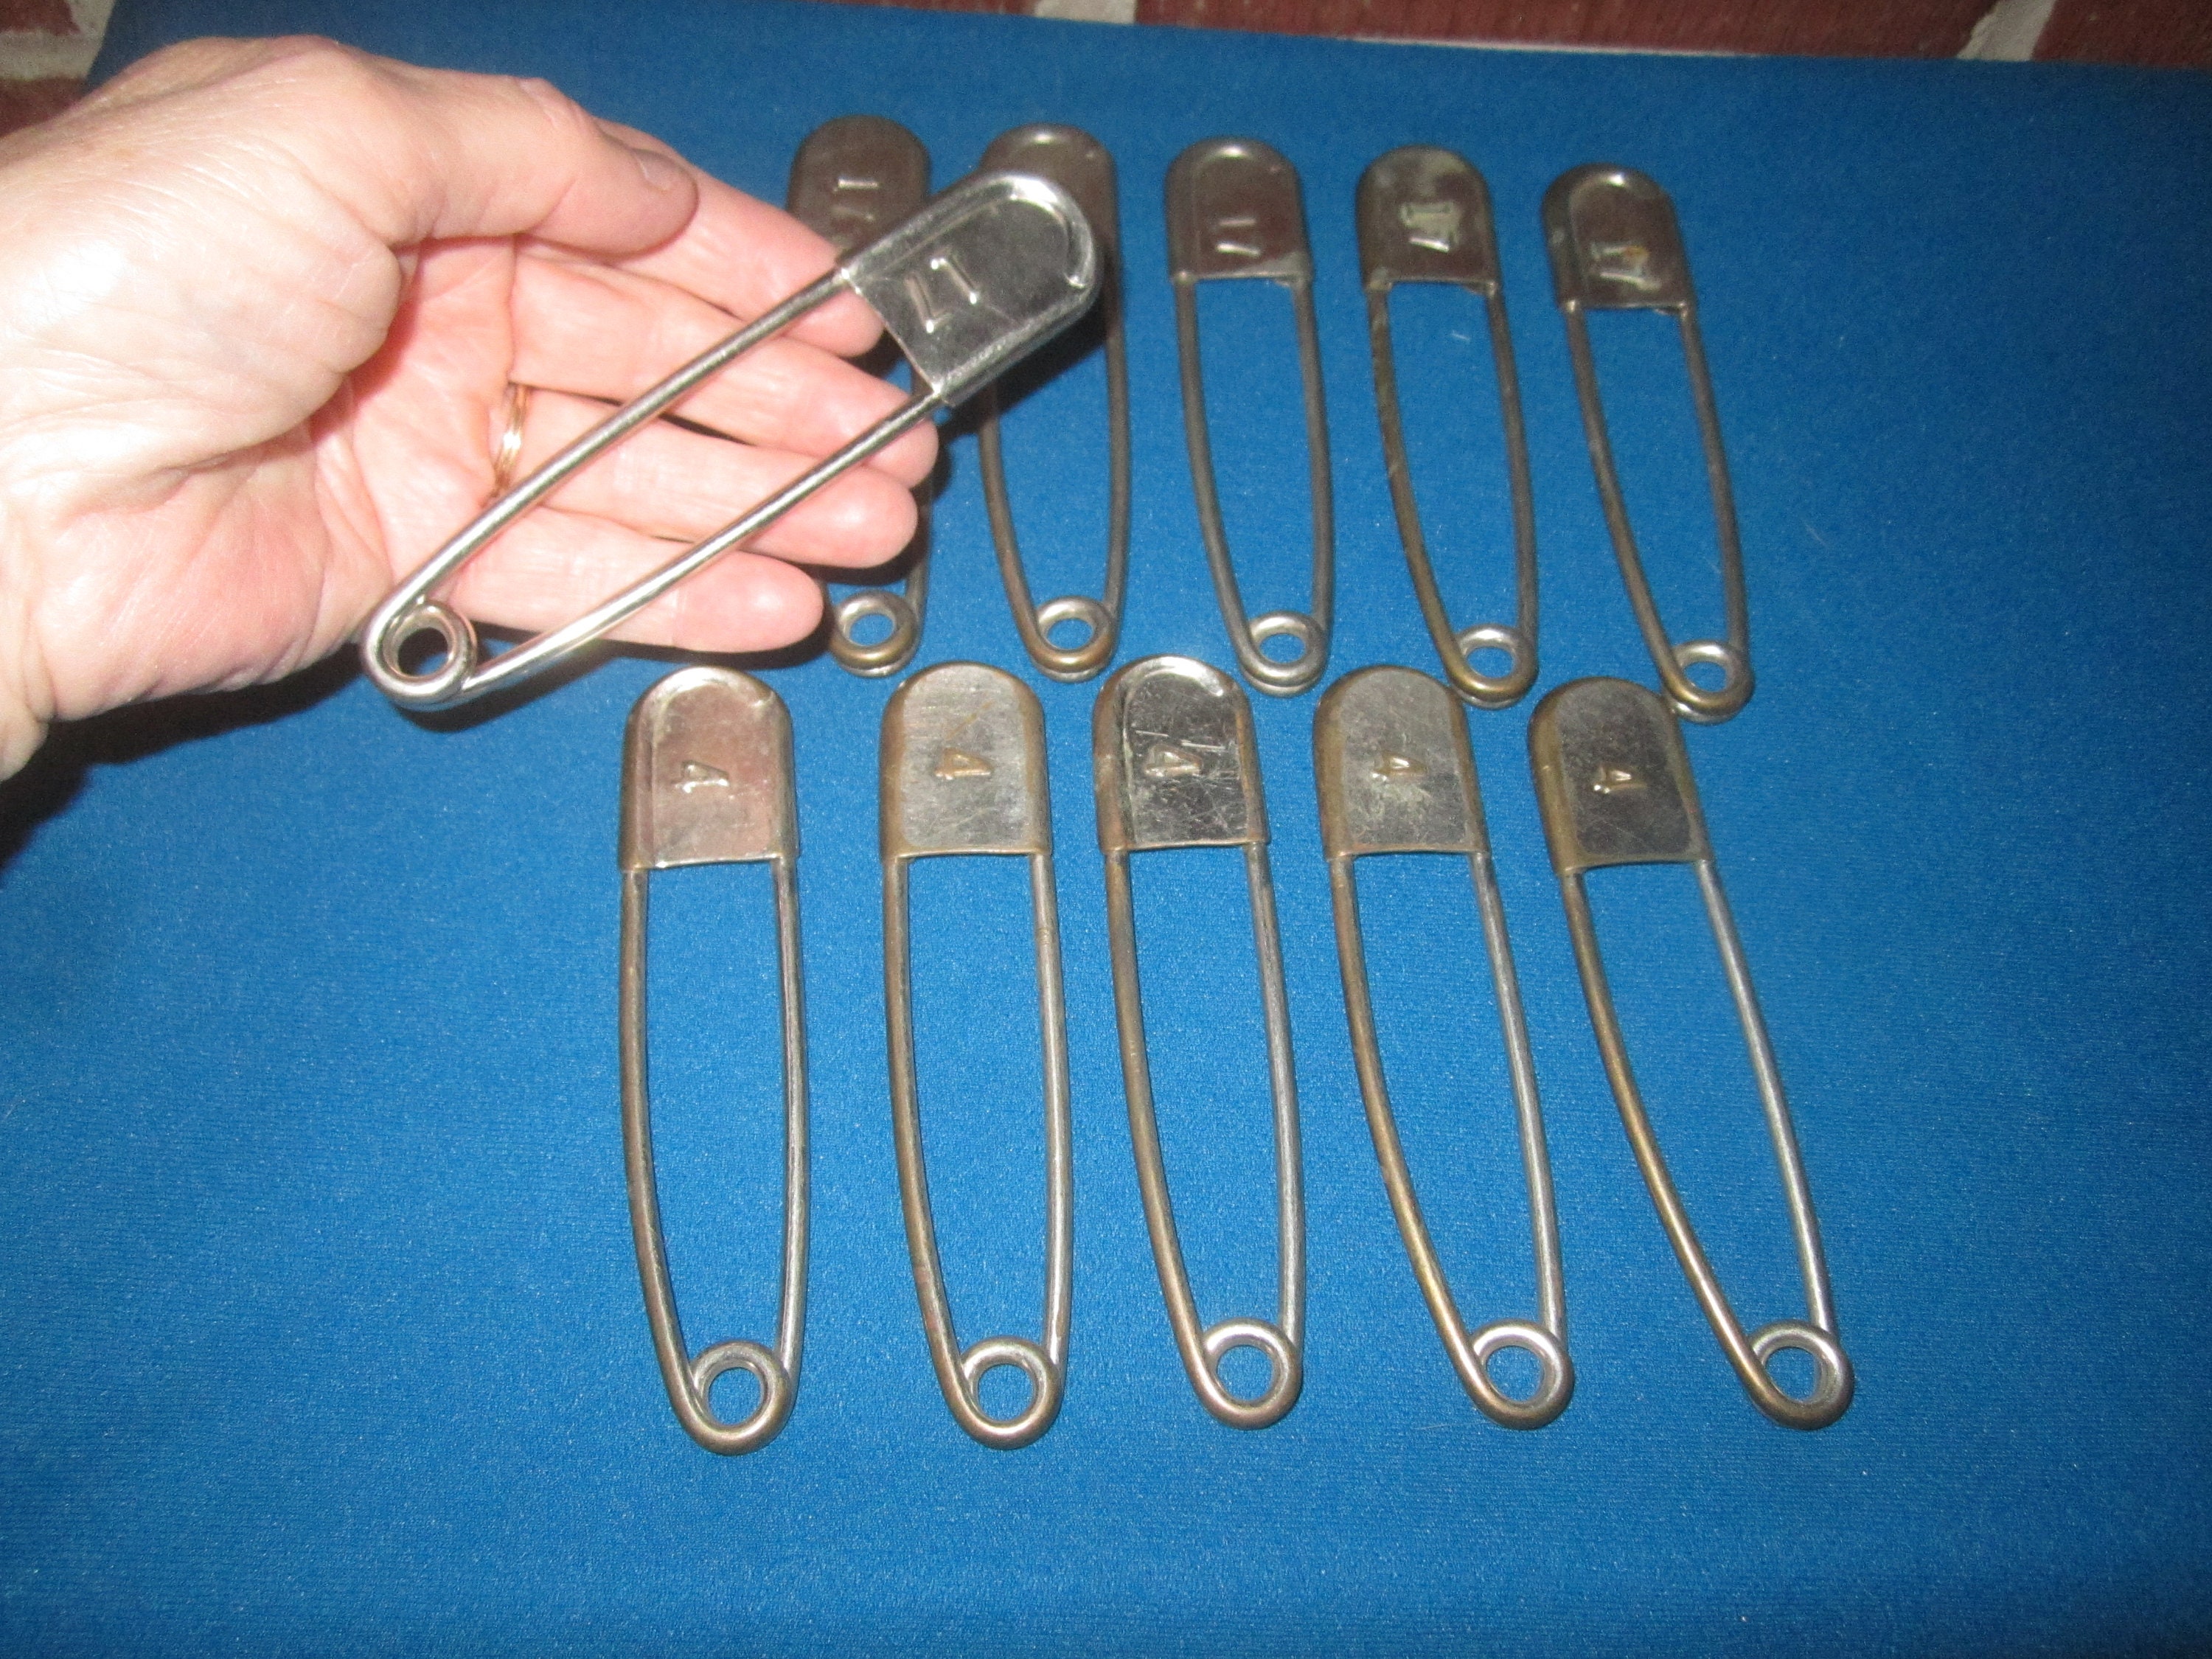 Extra Large Bronze Strong Heavy Duty Safety Pins Craft Jewelry